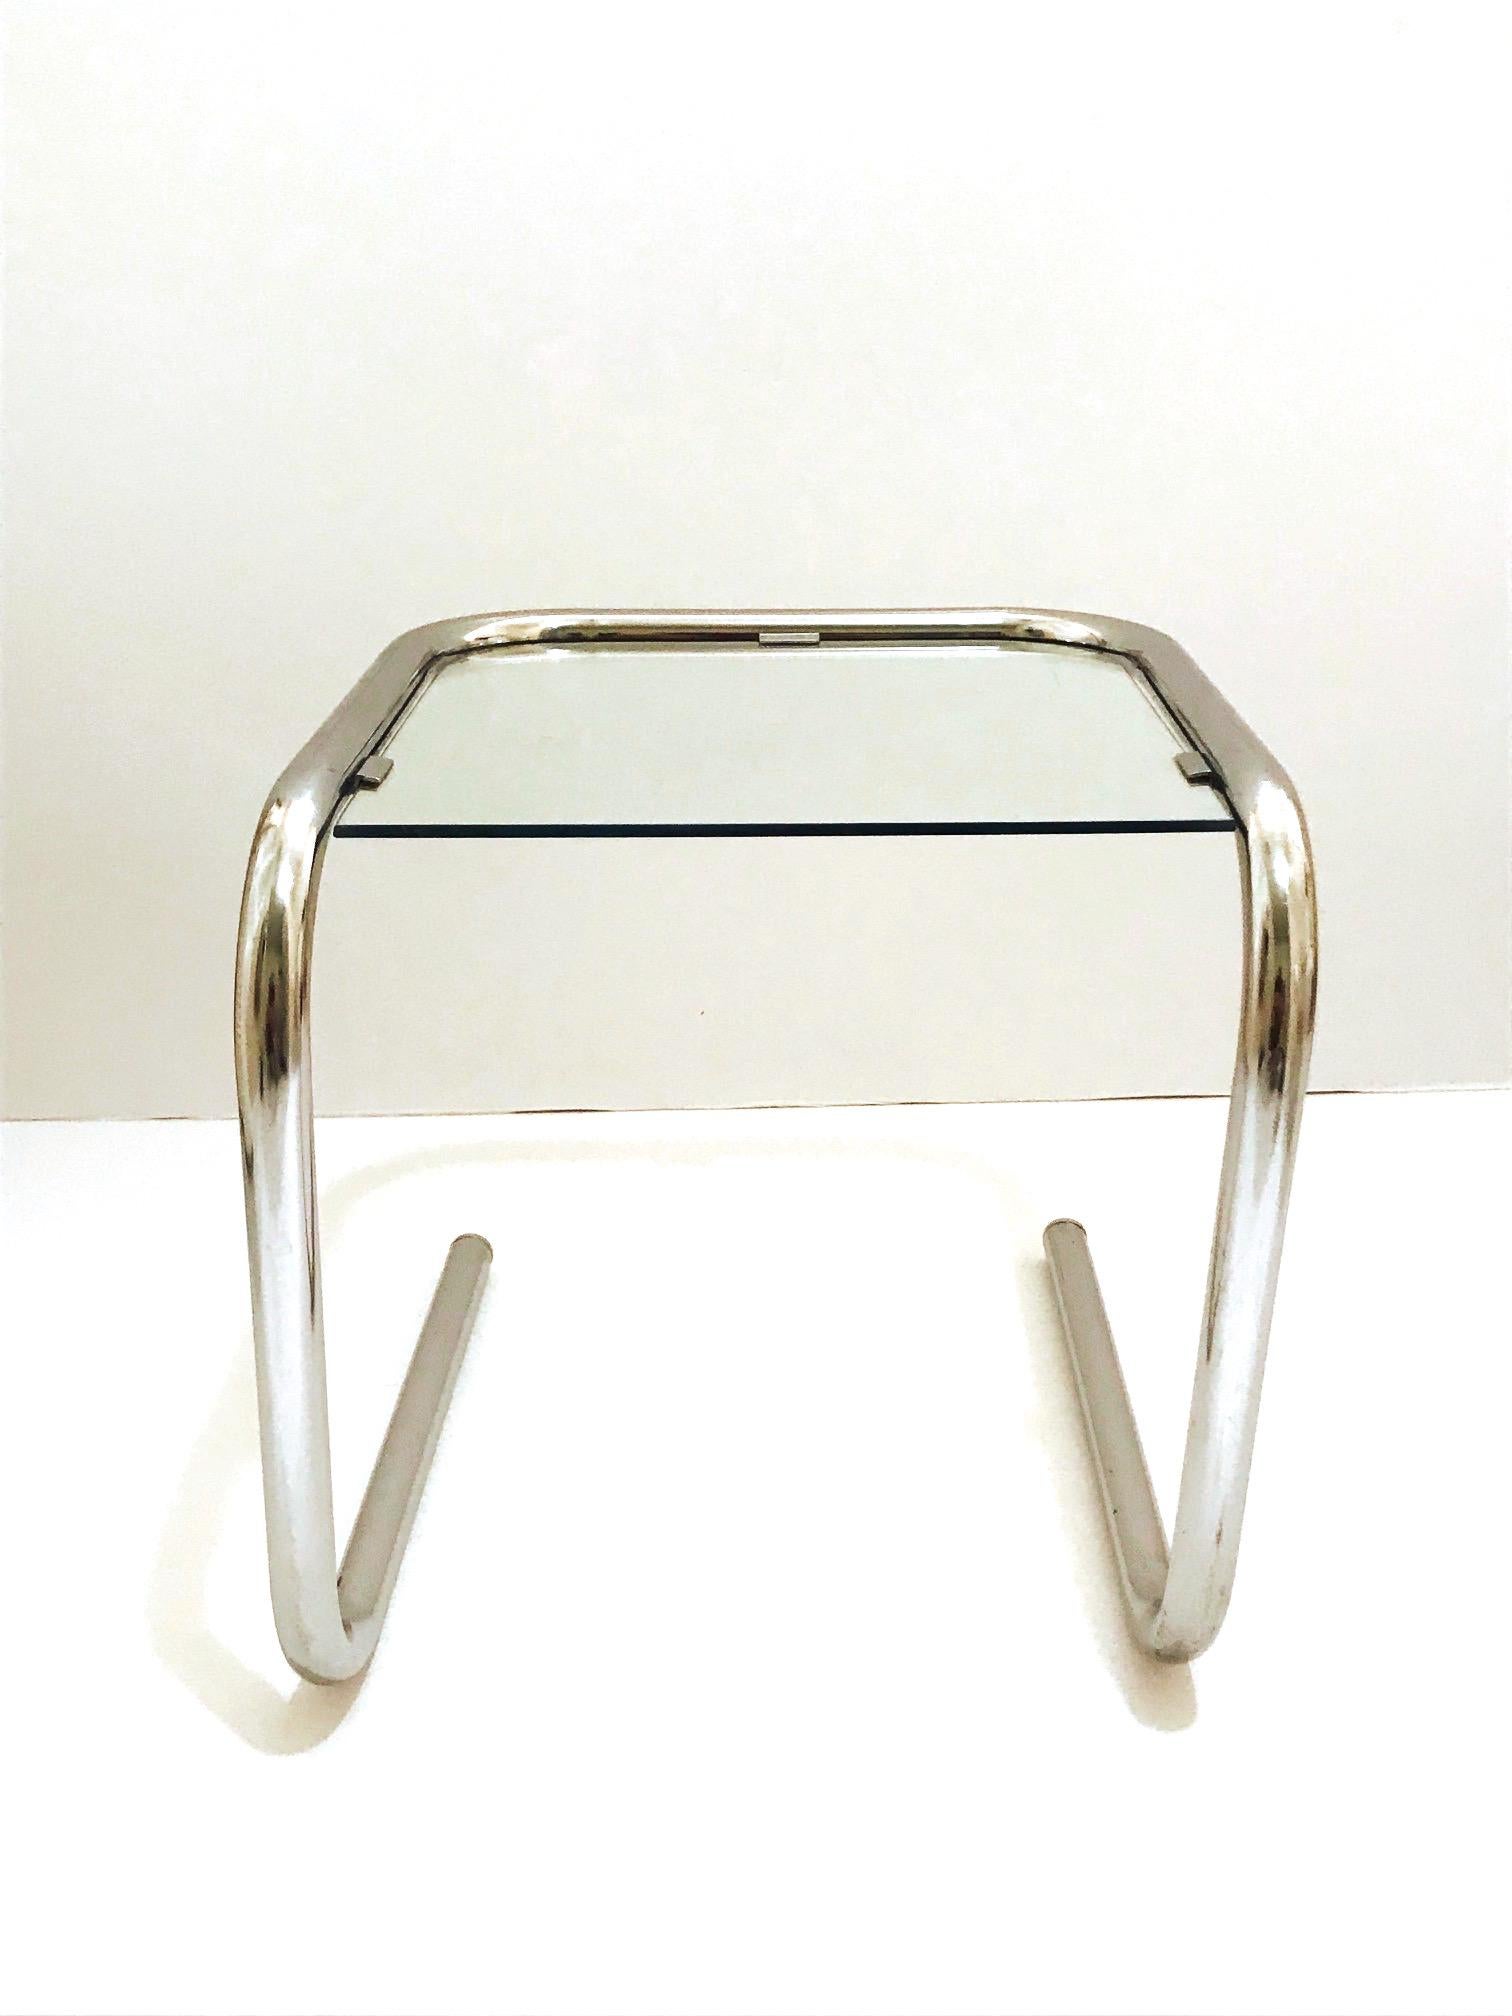 Polished Mid-Century Modern Tubular Chrome Side Table in the Style of Thonet, 1960s